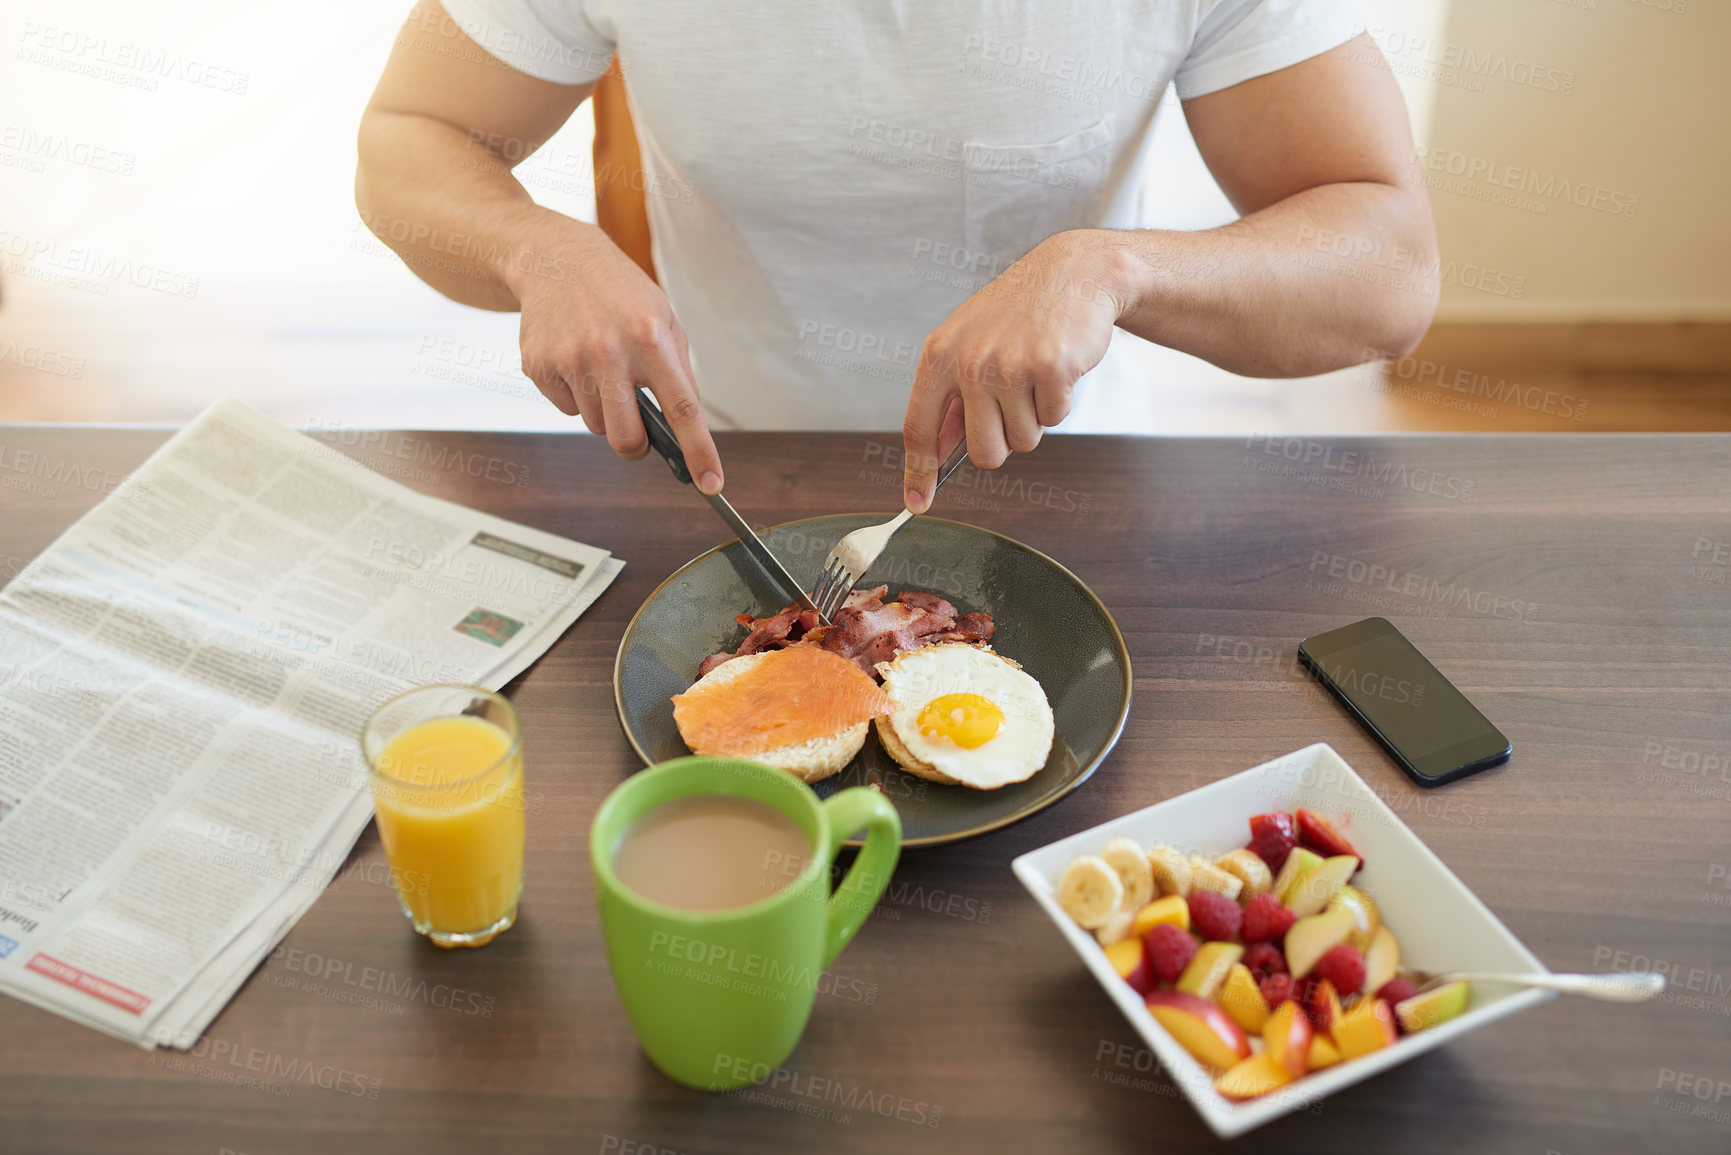 Buy stock photo Cropped shot of a bachelor enjoying breakfast at home